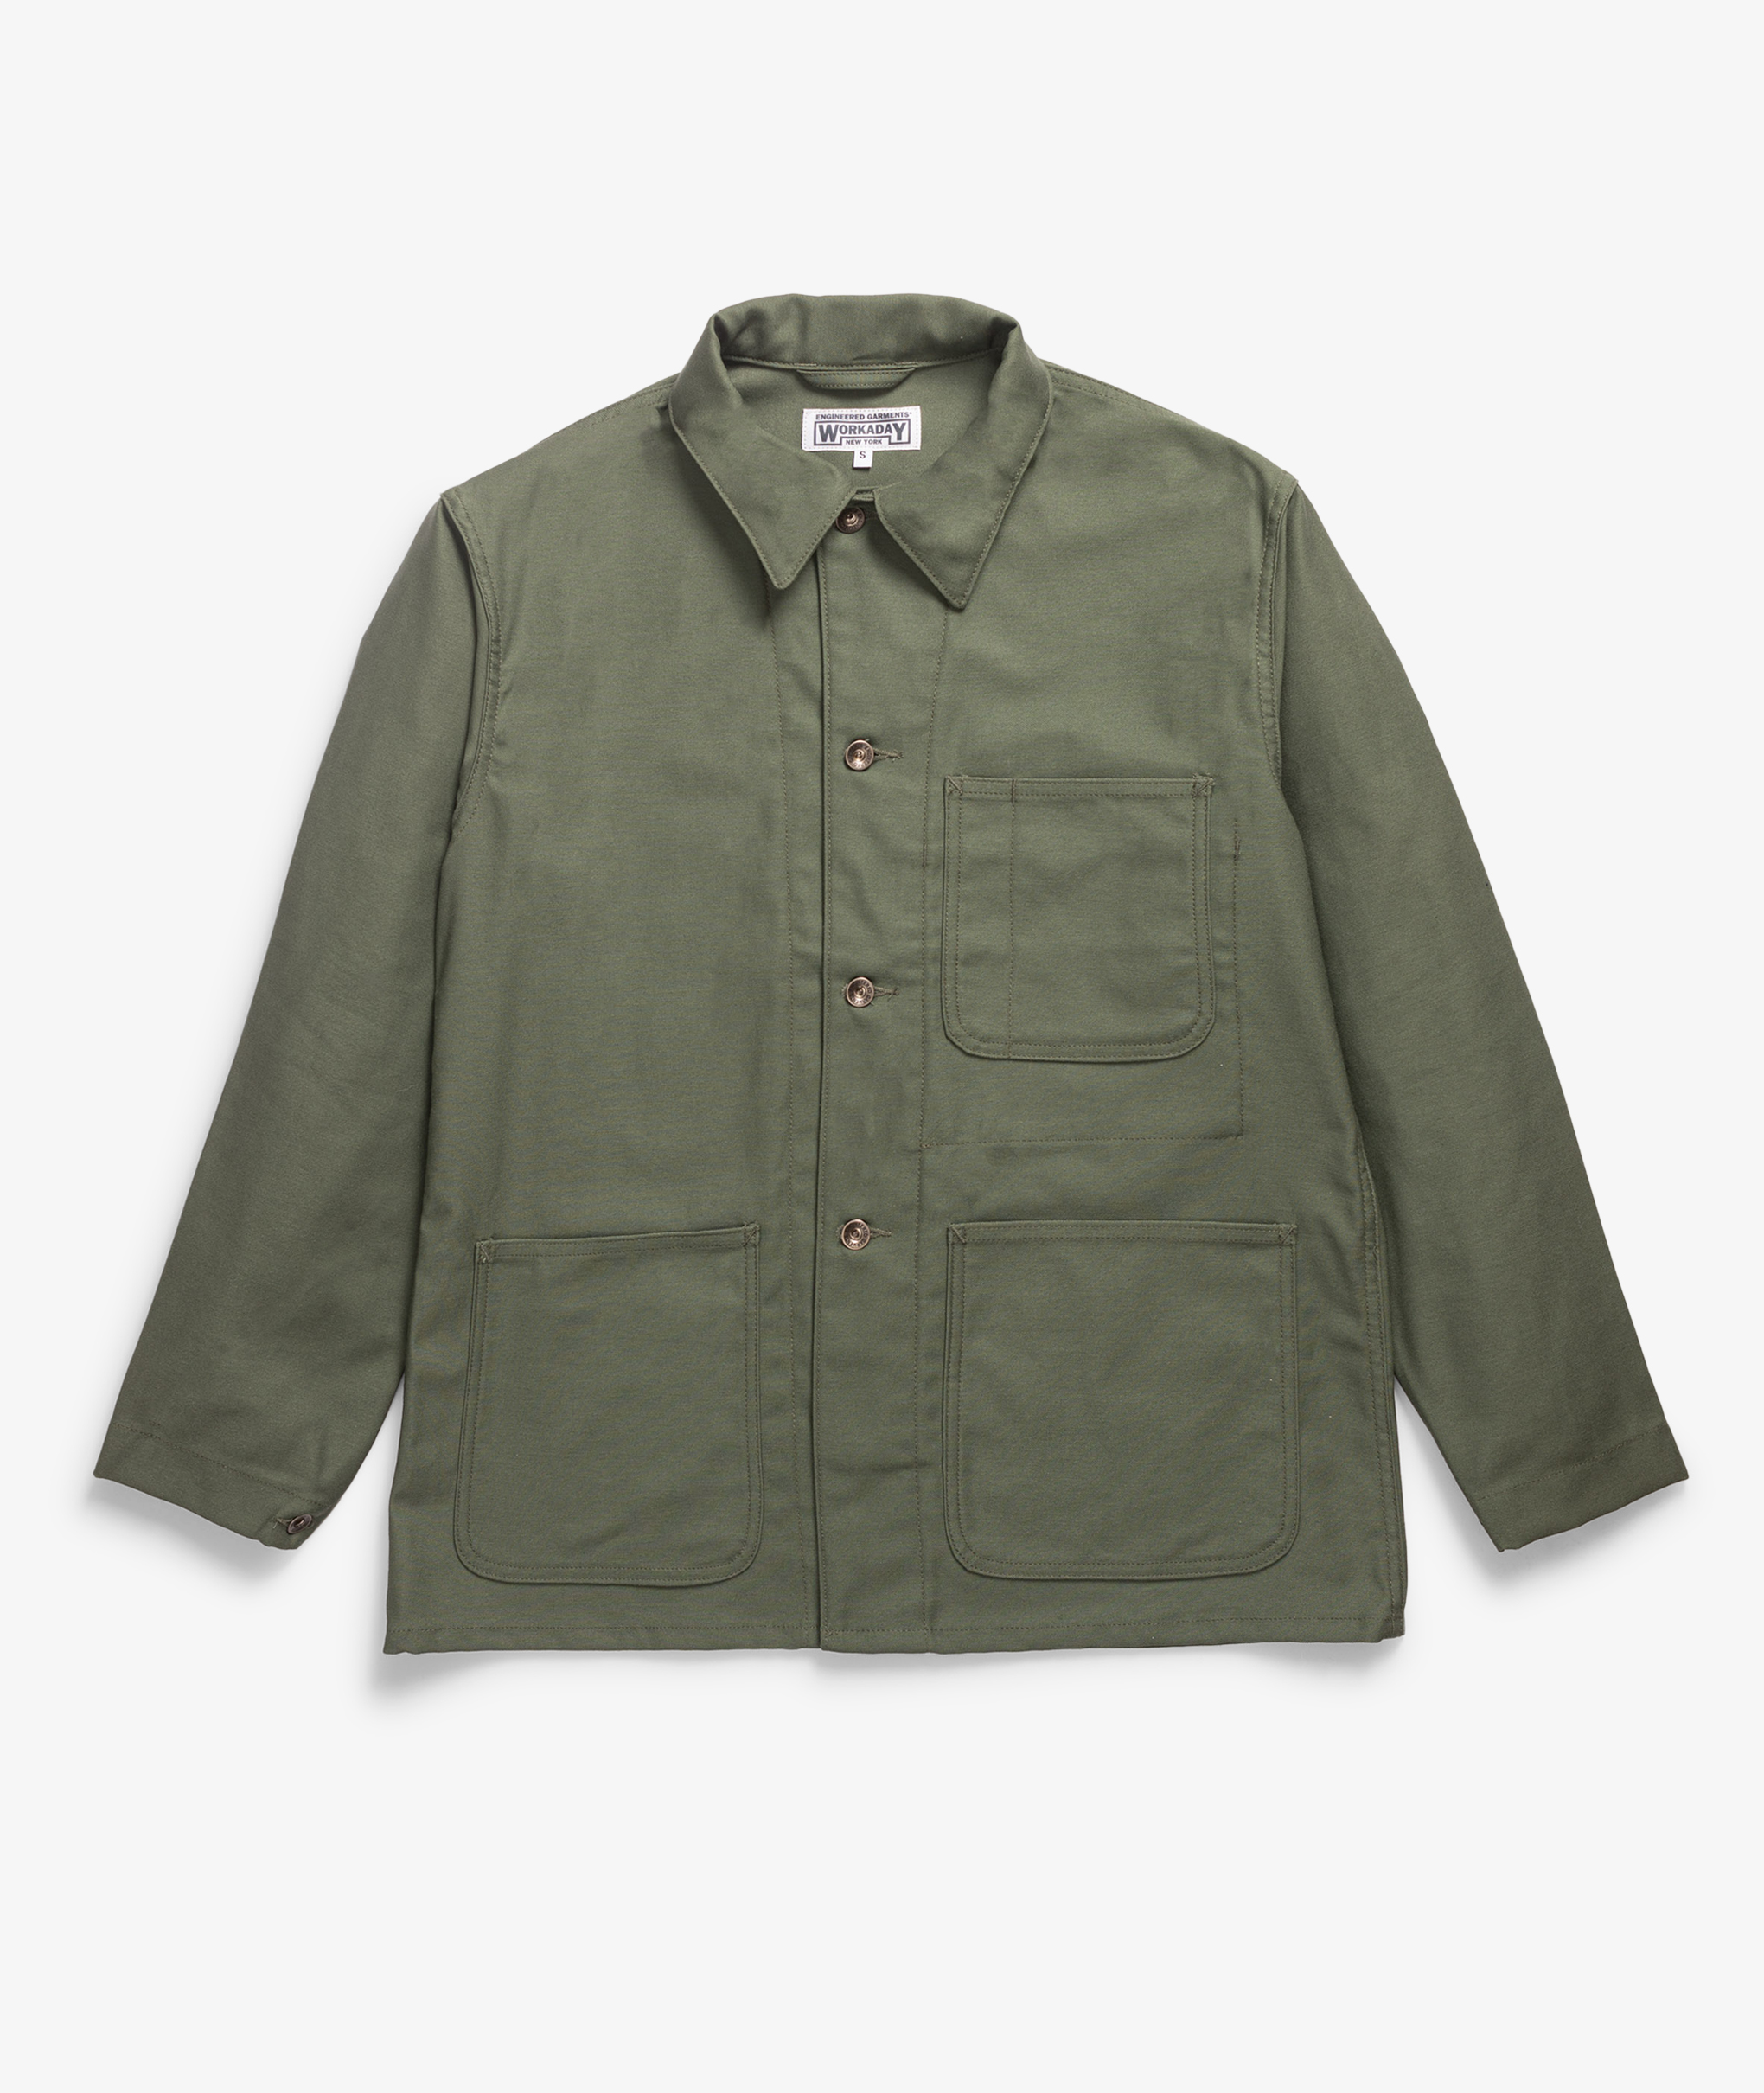 Norse Store | Shipping Worldwide - Engineered Garments WORKADAY 